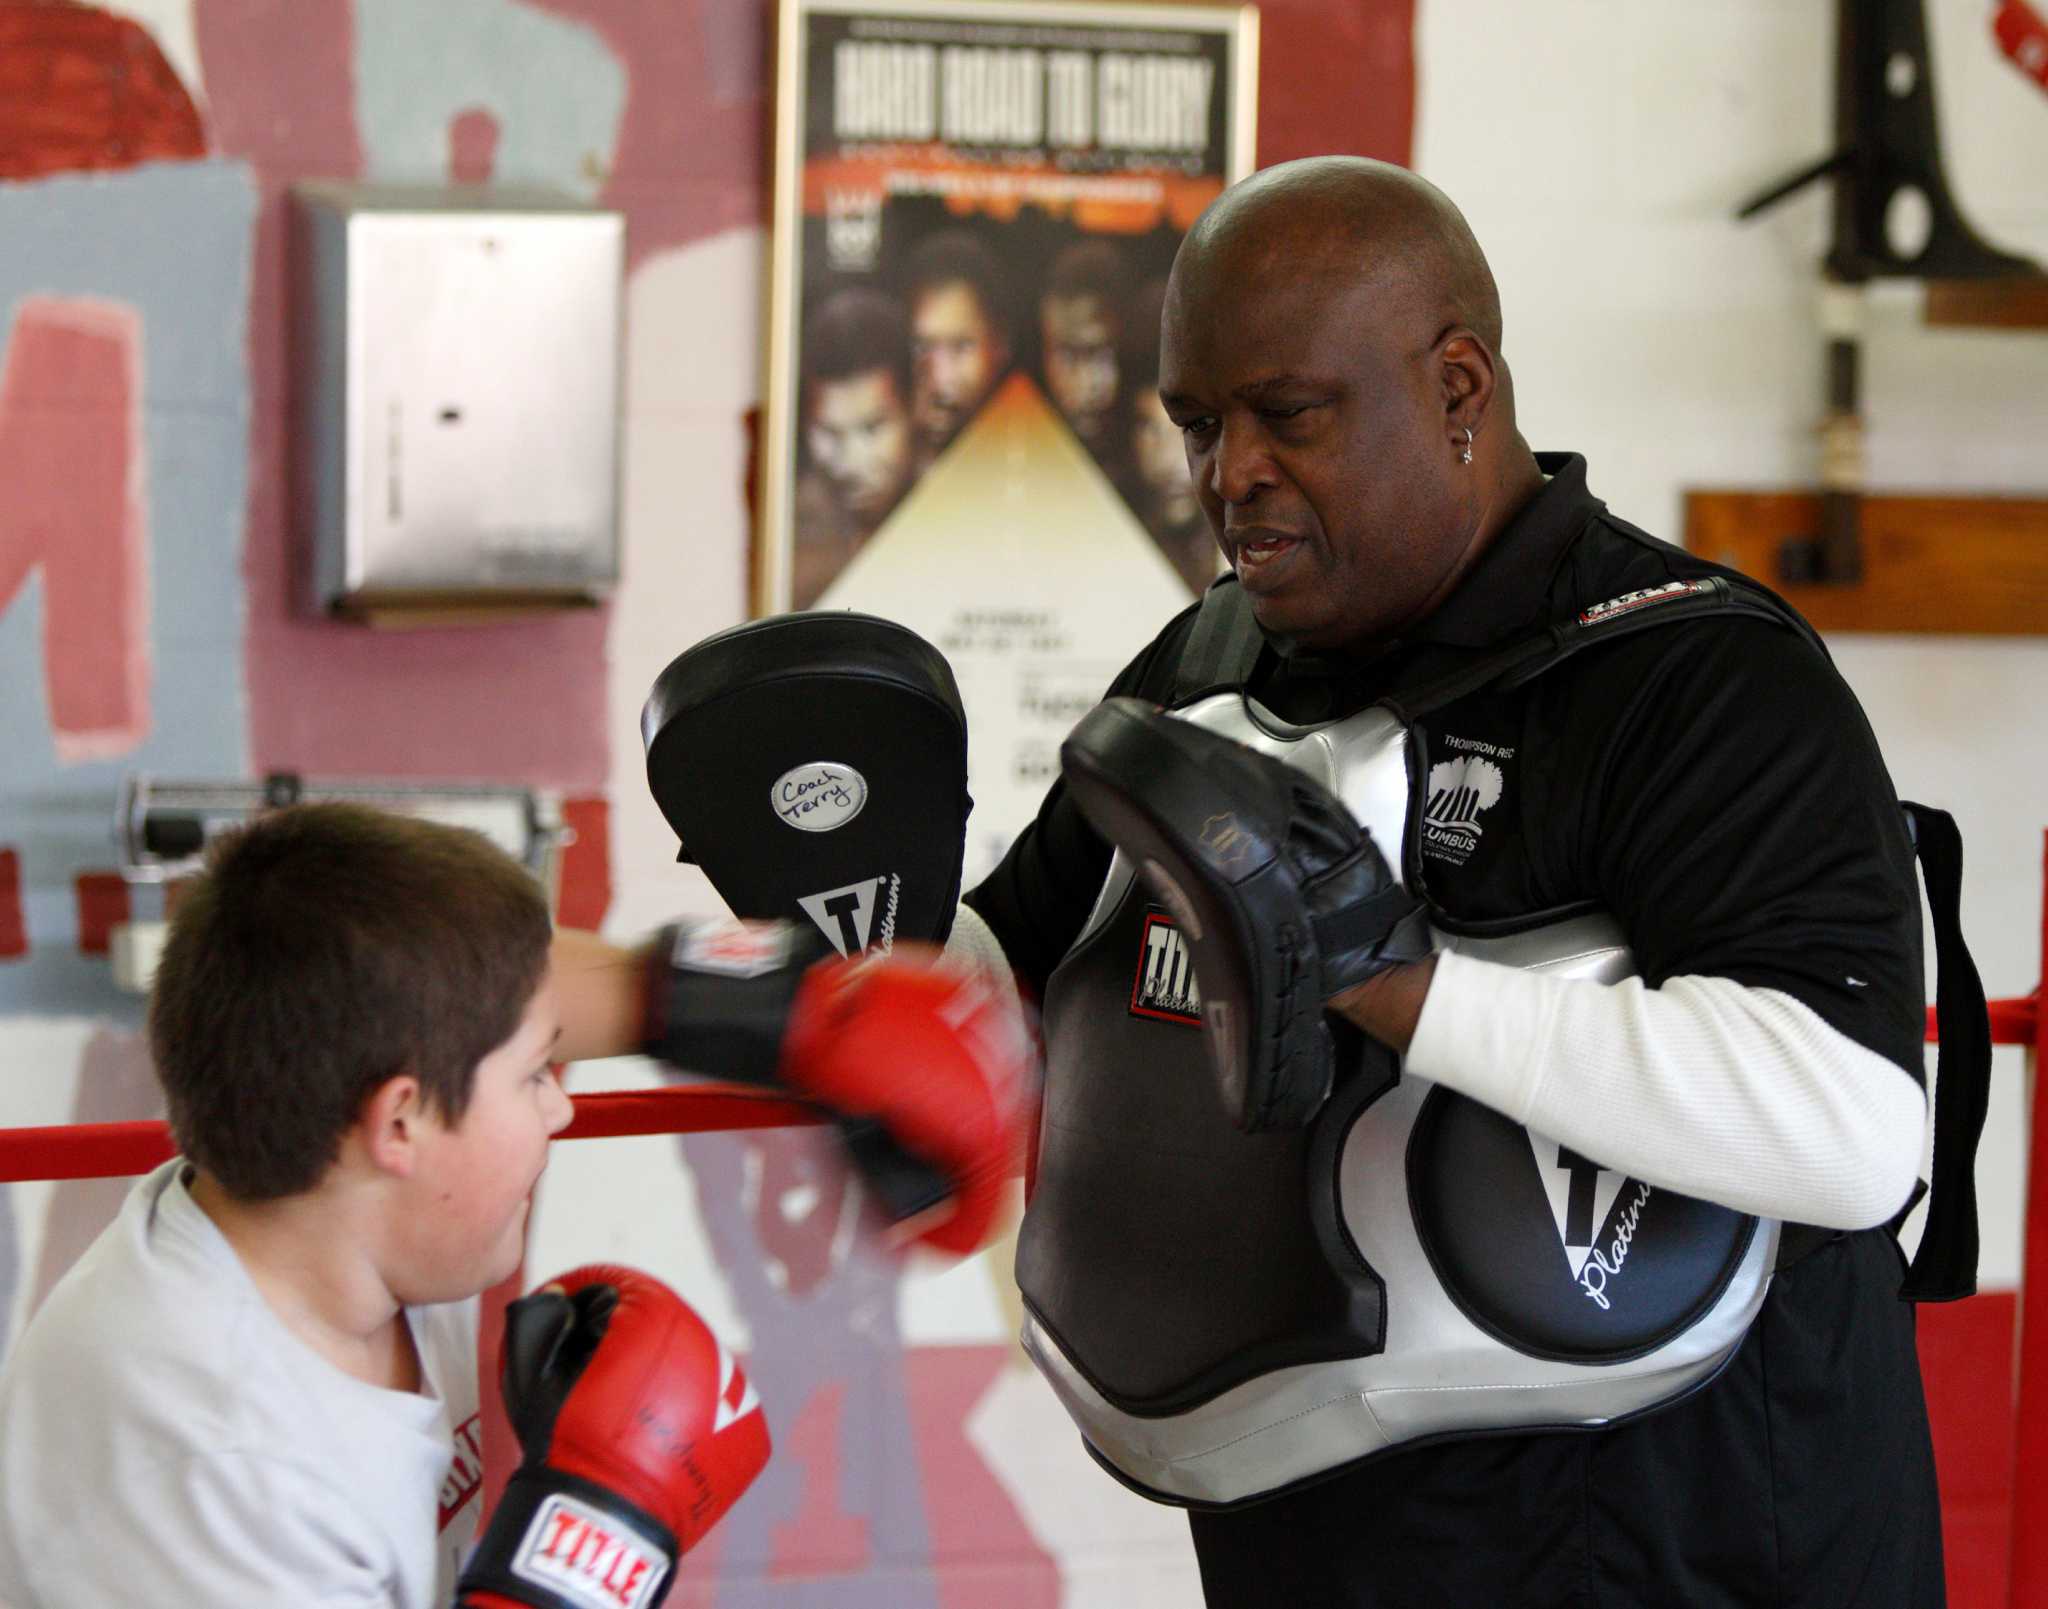 Thompson Community Center Boxing and James “Buster” Douglas